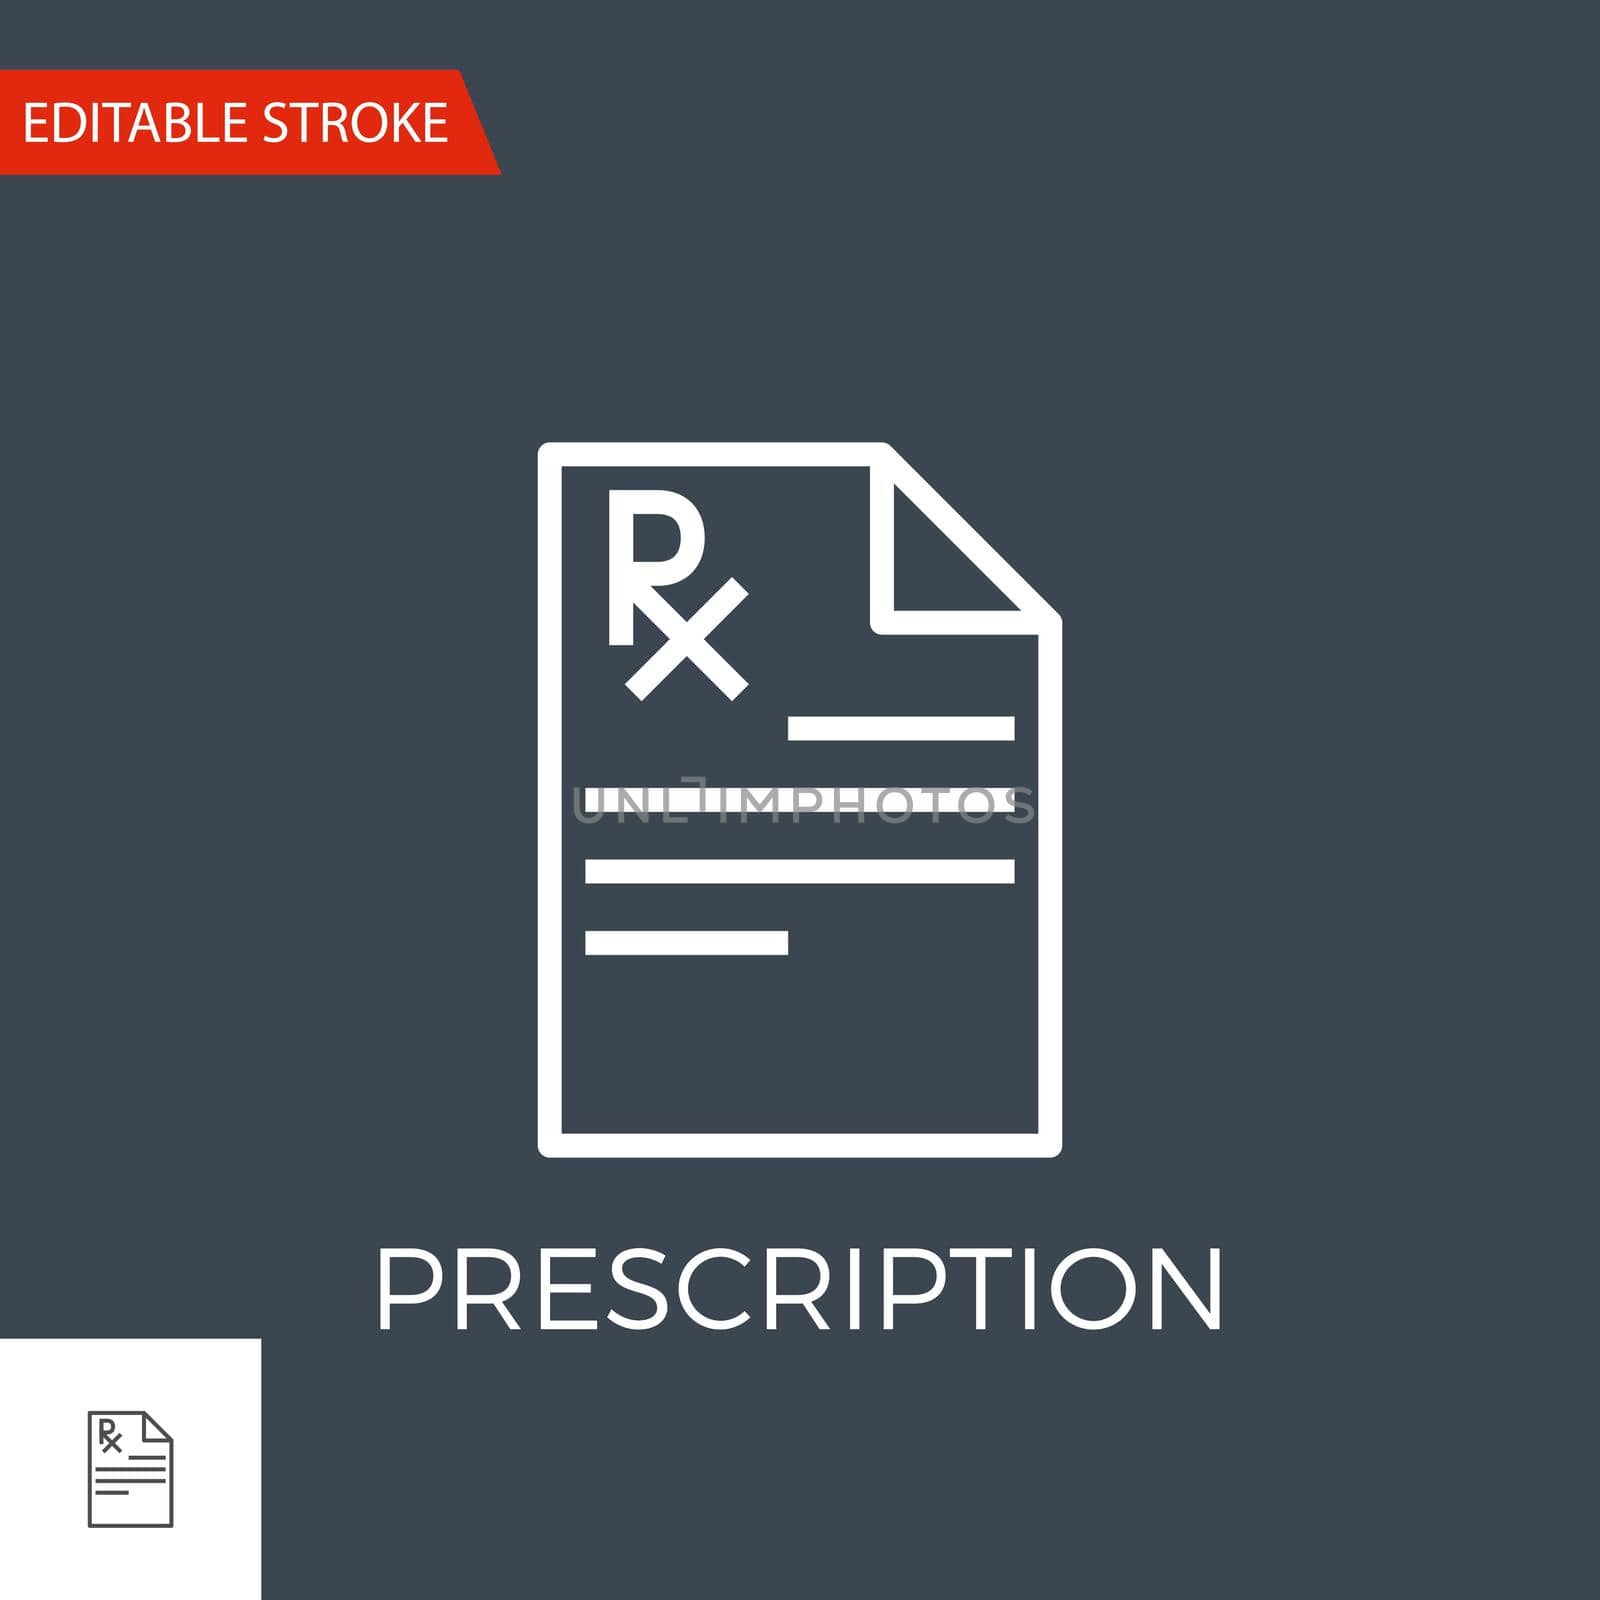 Prescription Thin Line Vector Icon. Flat Icon Isolated on the Black Background. Editable Stroke EPS file. Vector illustration.